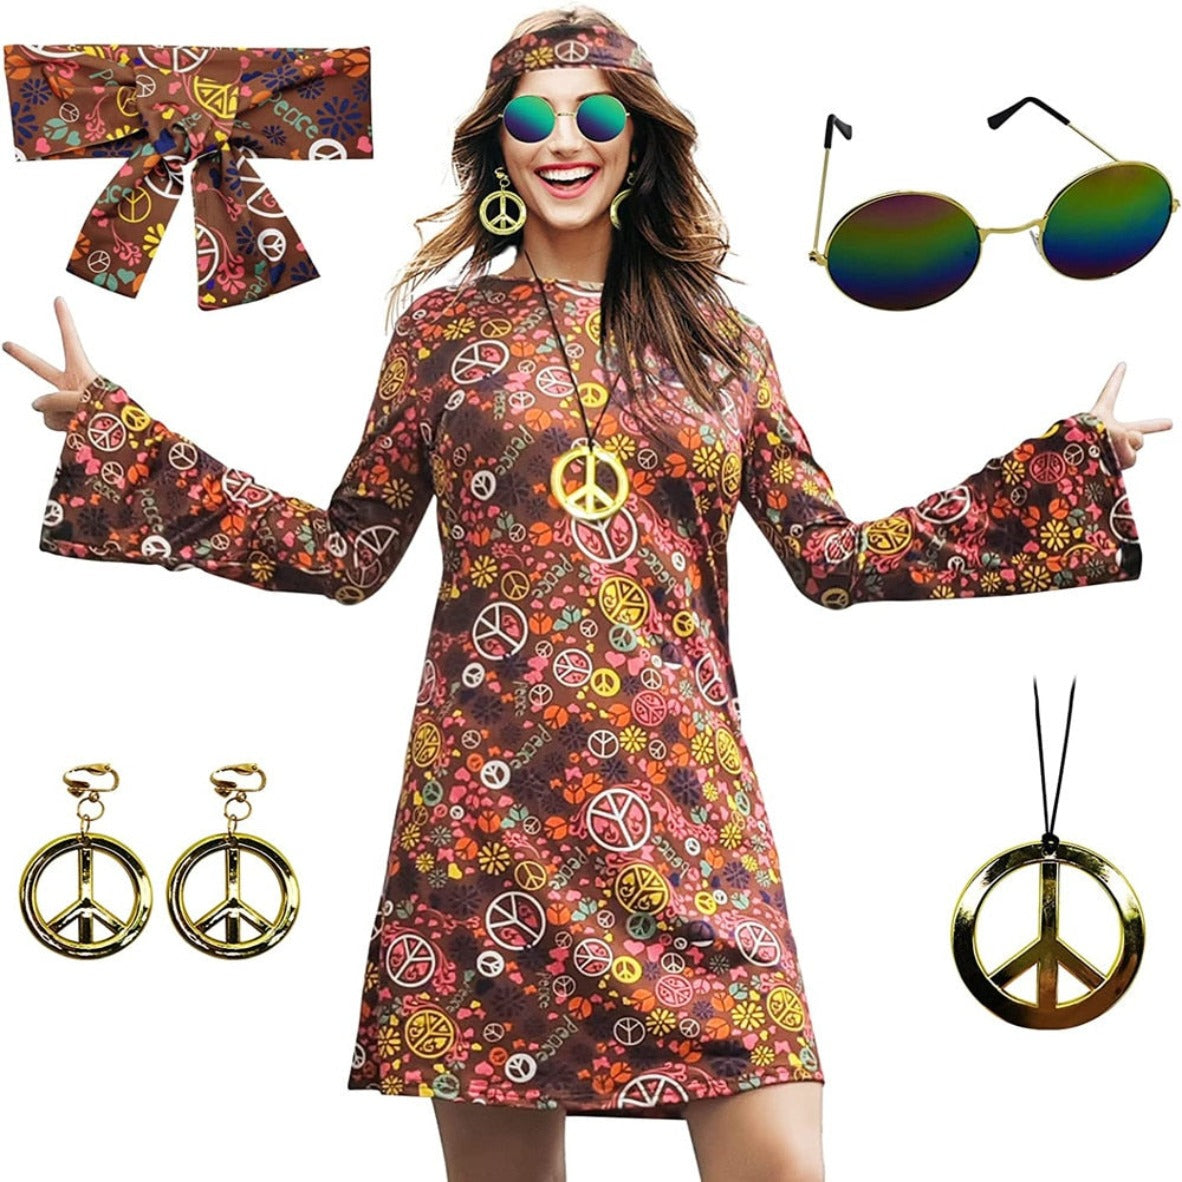 Hippy Heavenly Dress with Accessories